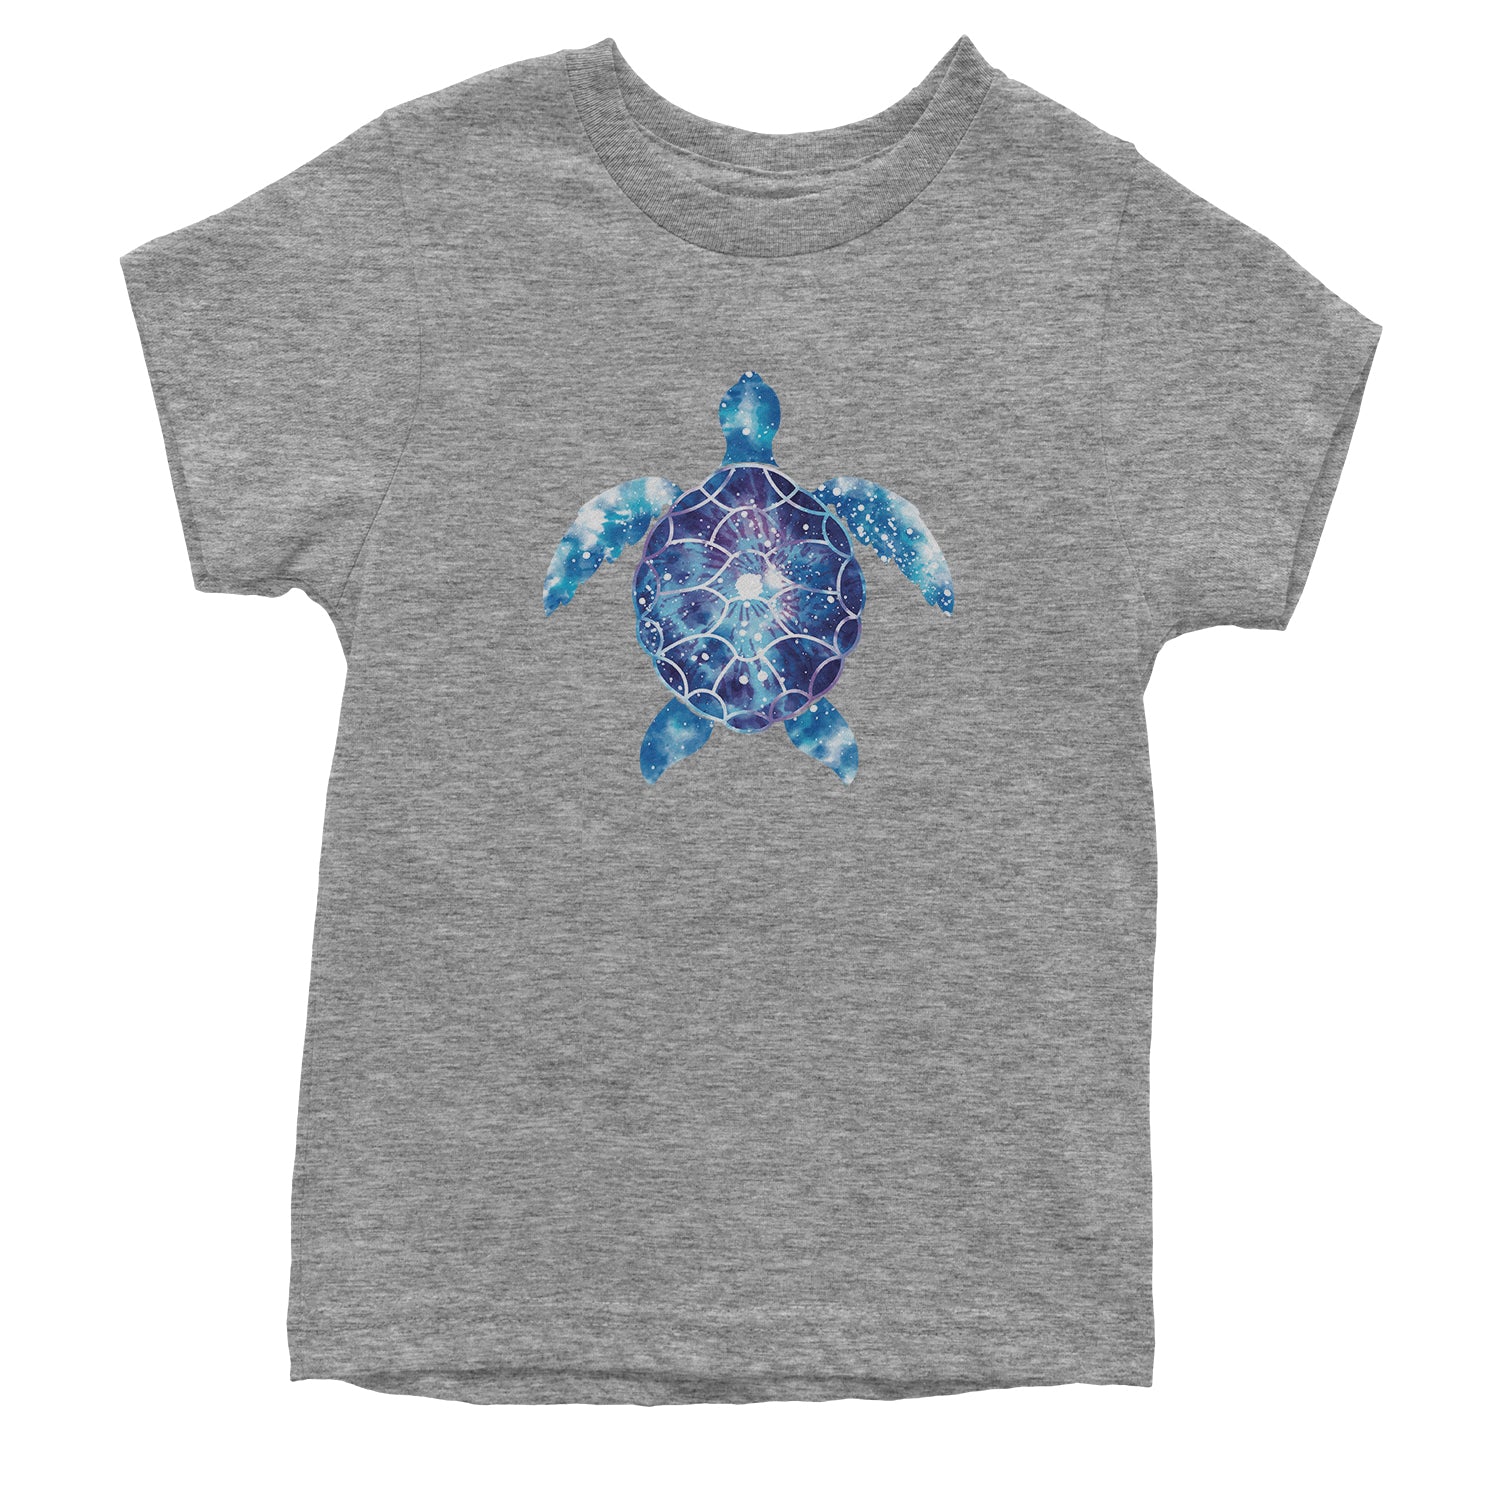 Tie Dye Sea Turtle Youth T-shirt eco, friendly, life, ocean, turtle by Expression Tees